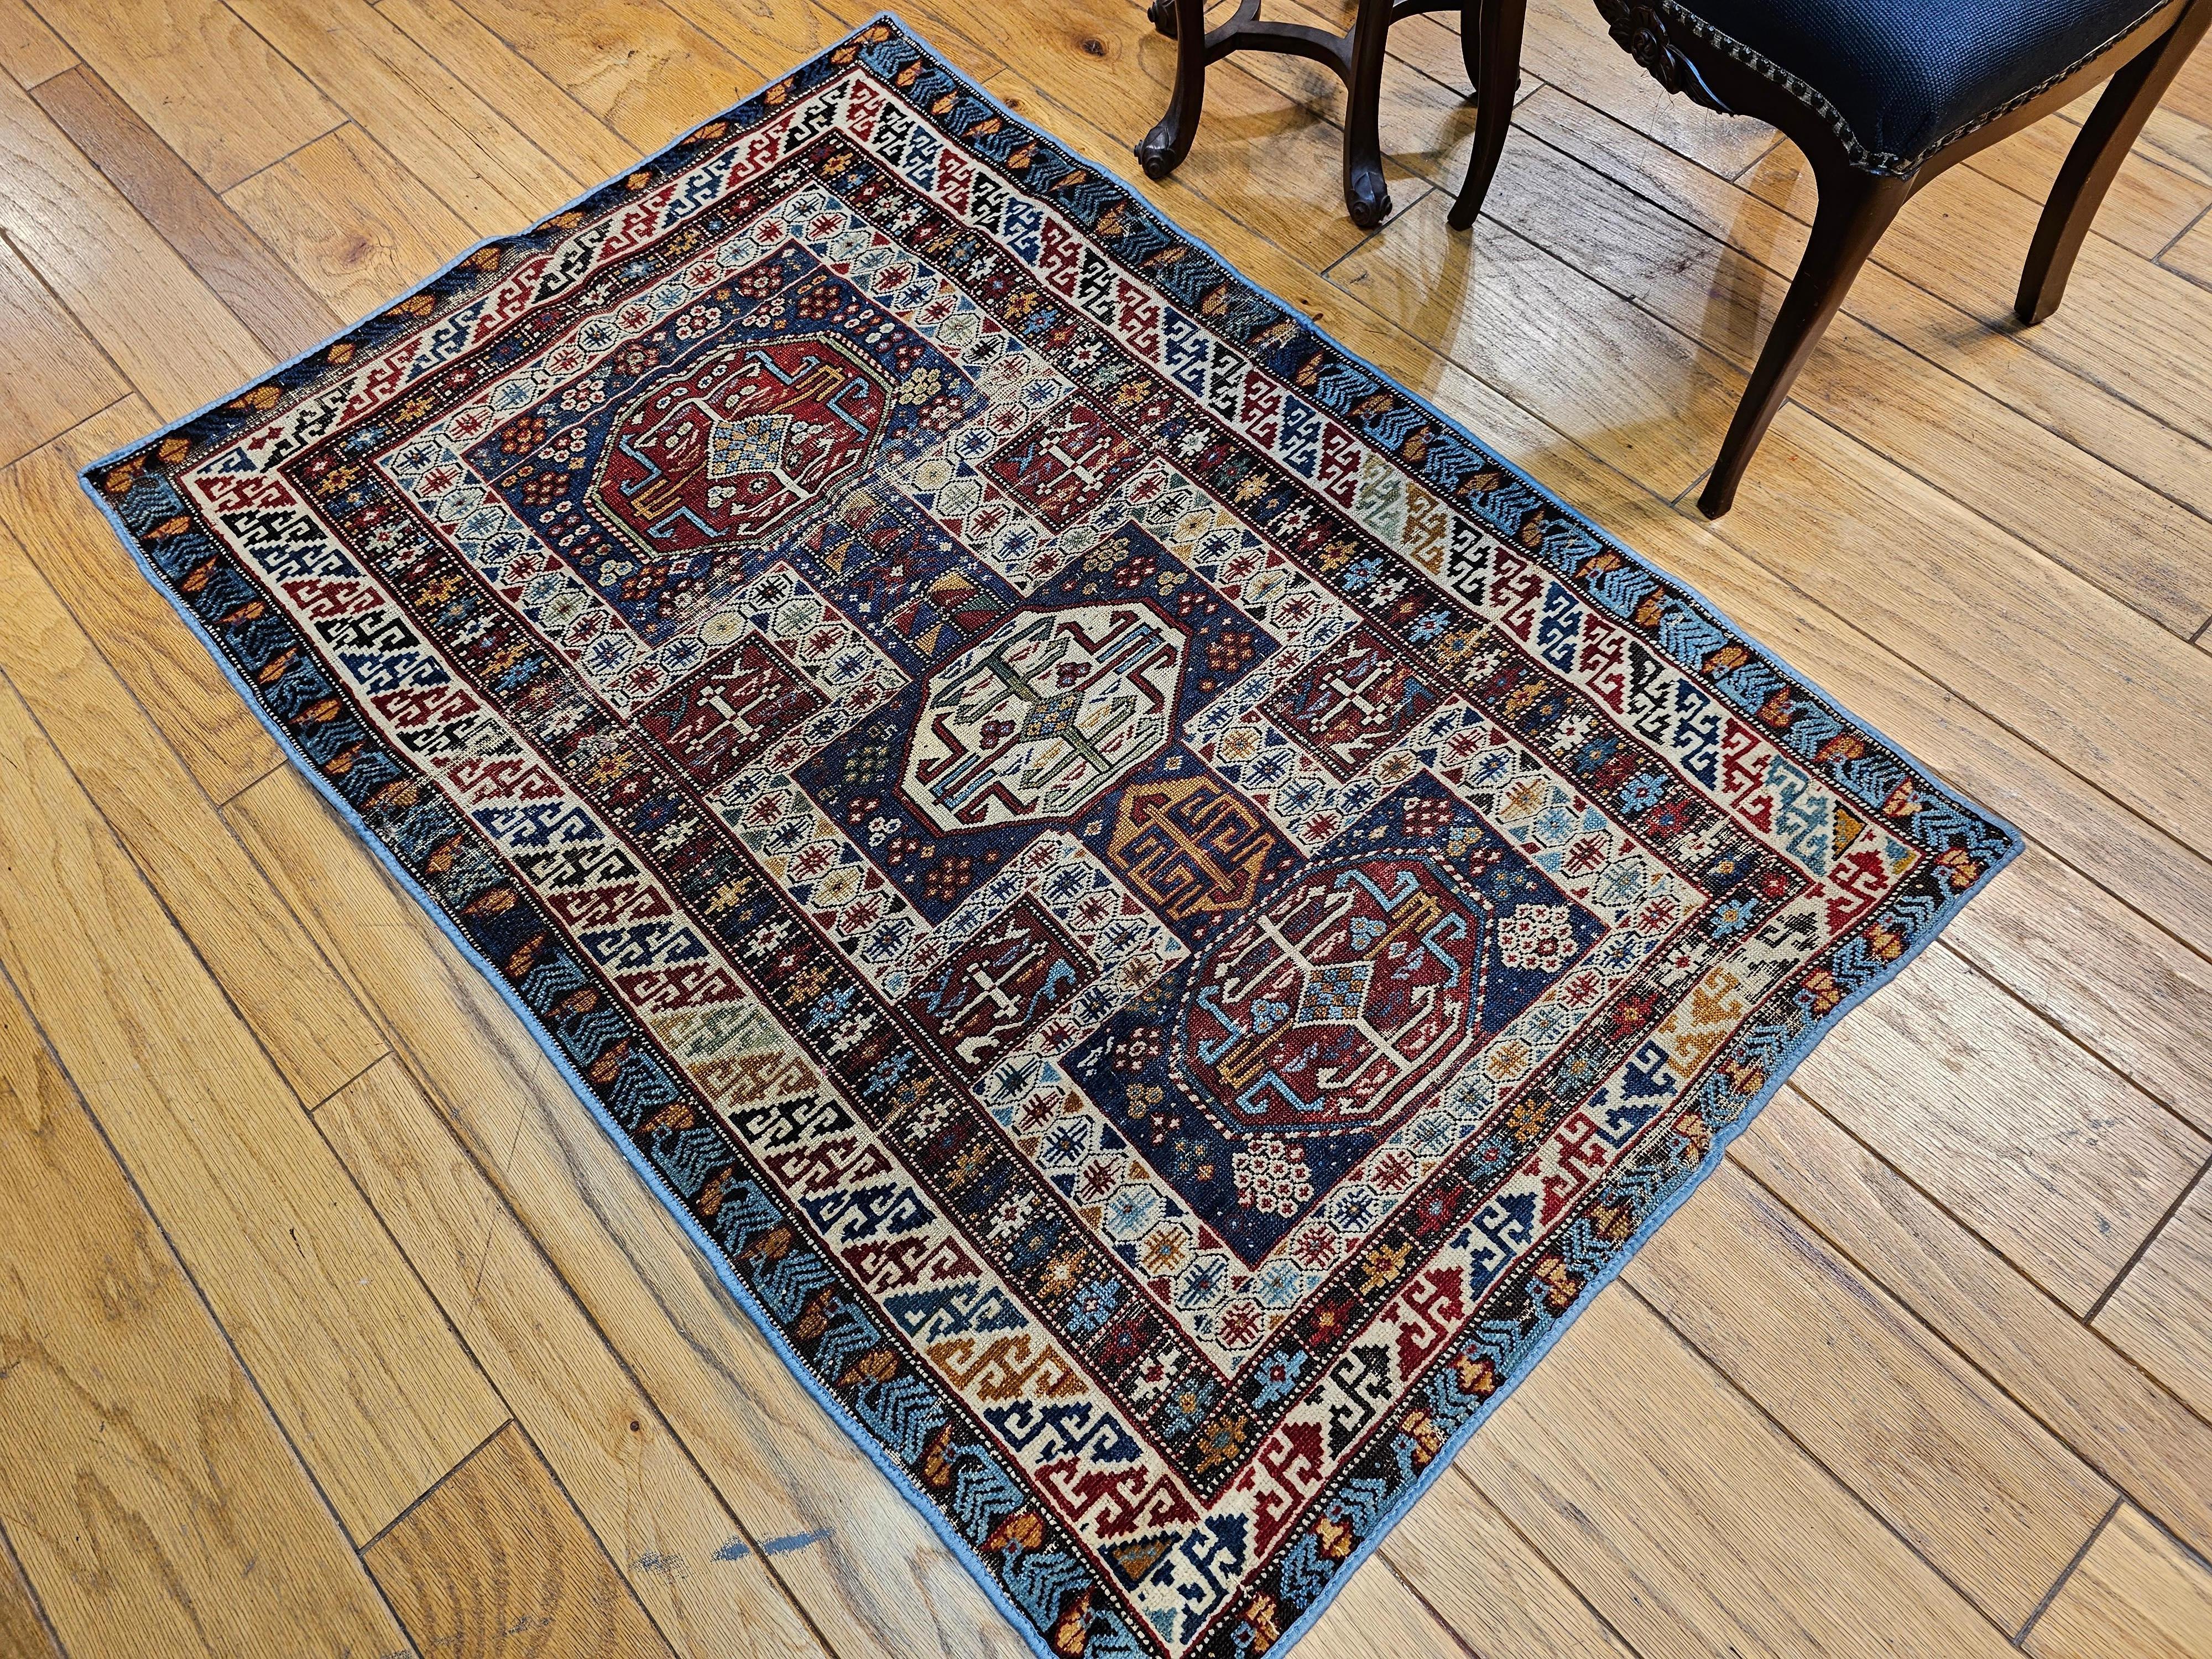  Early 1900s Caucasian Kuba Area Rug in French Blue, Red, Ivory, Yellow For Sale 5